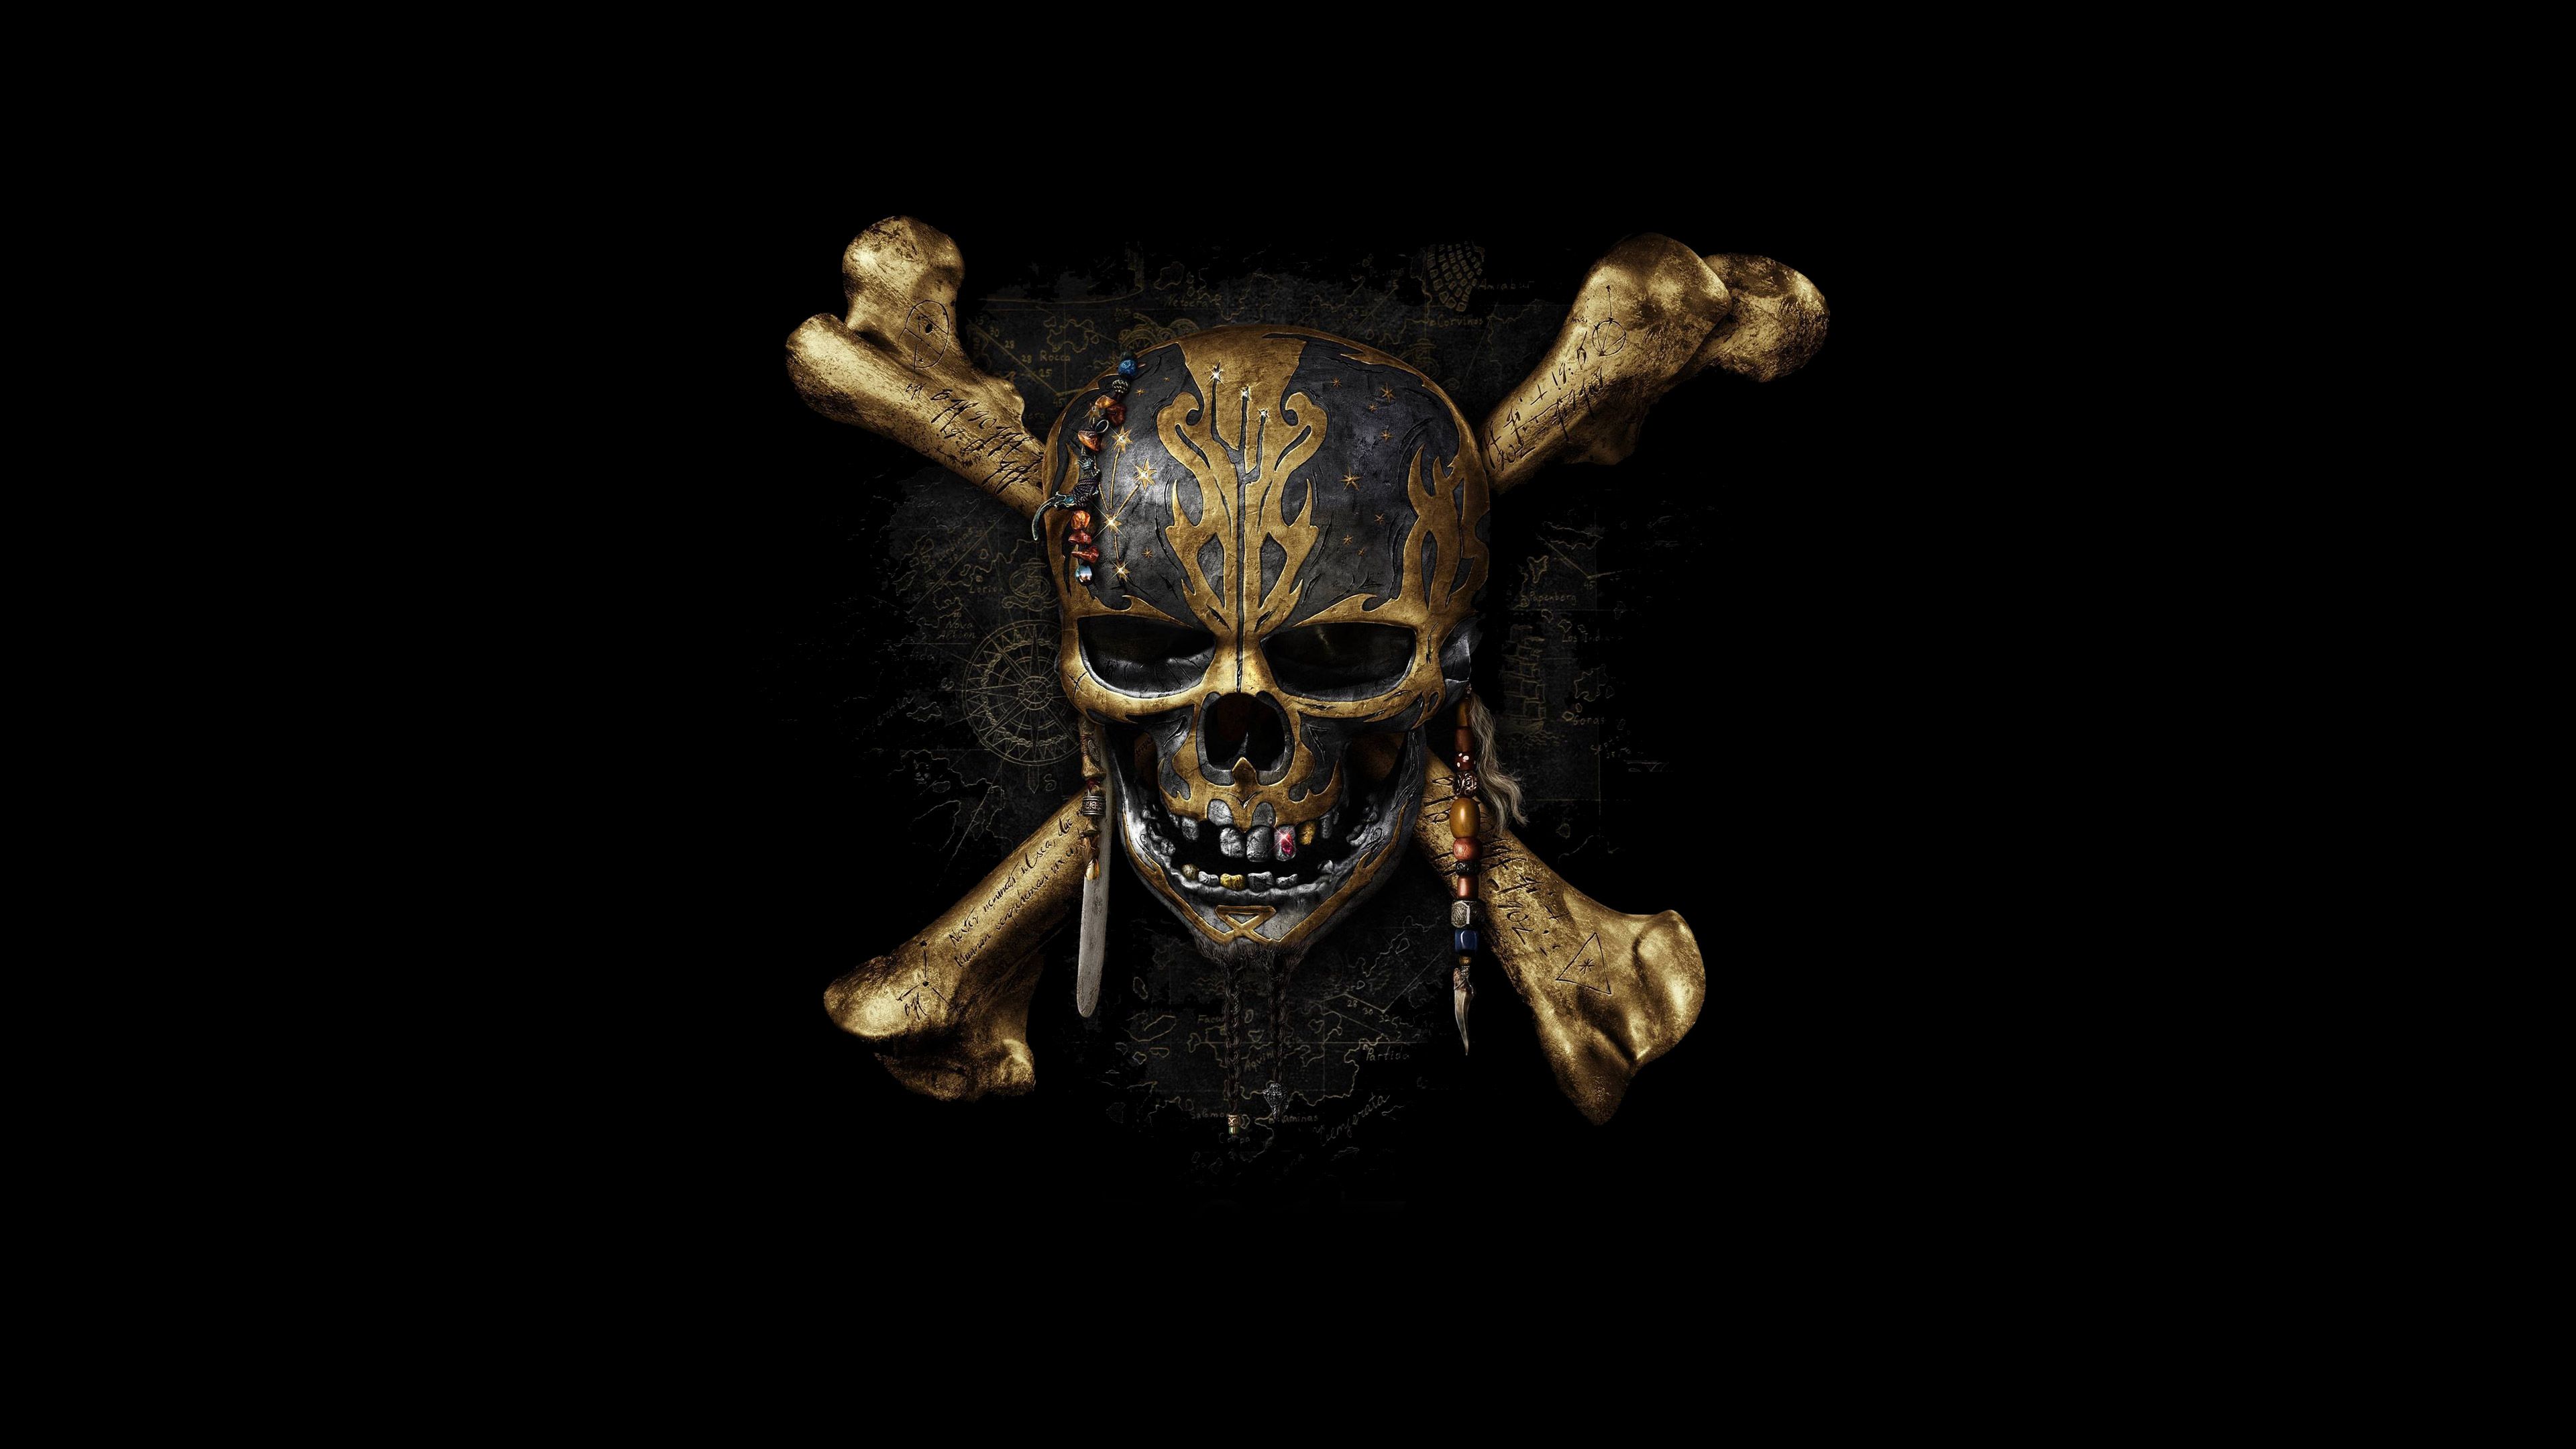 Pirates 4K wallpaper for your desktop or mobile screen free and easy to download